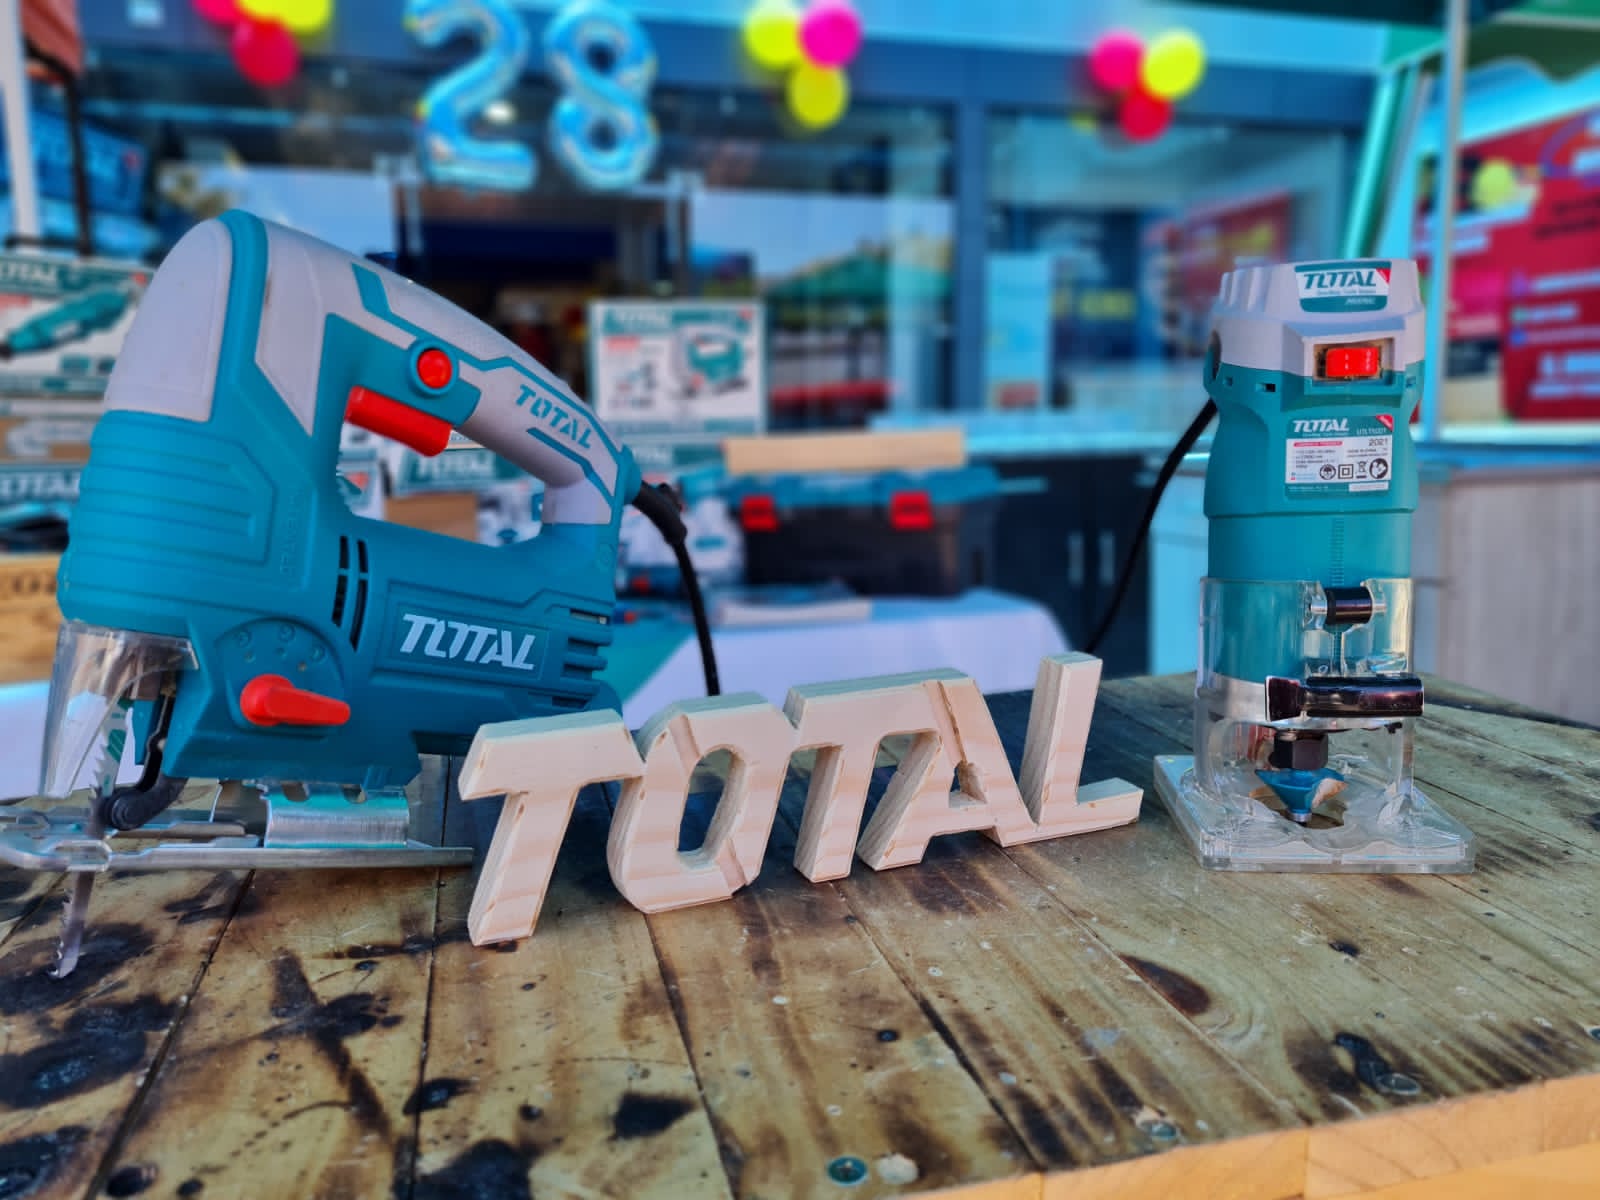 TOTAL TOOLS WORLD - TOTAL will always be your ONE-STOP TOOLS STATION! #TOTAL  #TOTALSTORE #TOTALTOOLS #ONESTOPTOOLSSTATION #TOOLS #COLLECTION #Powertools  #Handtools